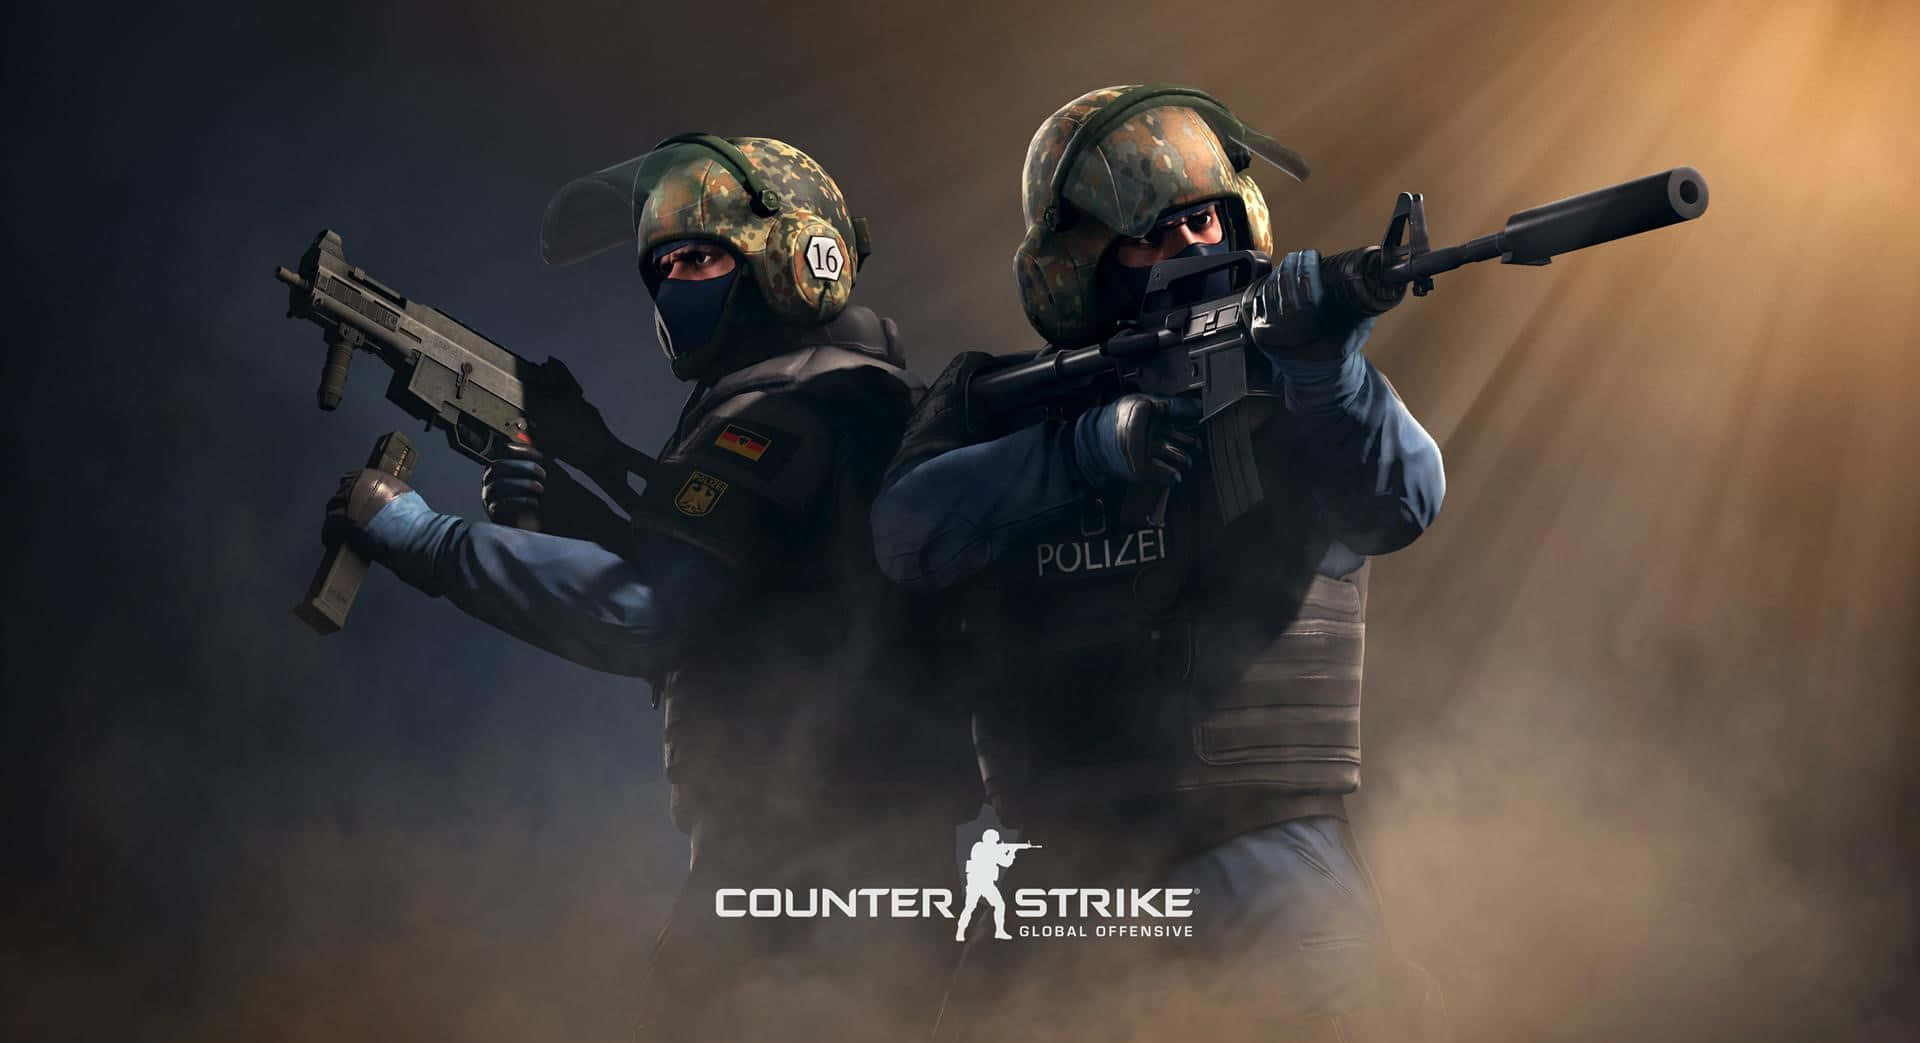 It's time to jump in and get playing with Counter-Strike! Wallpaper